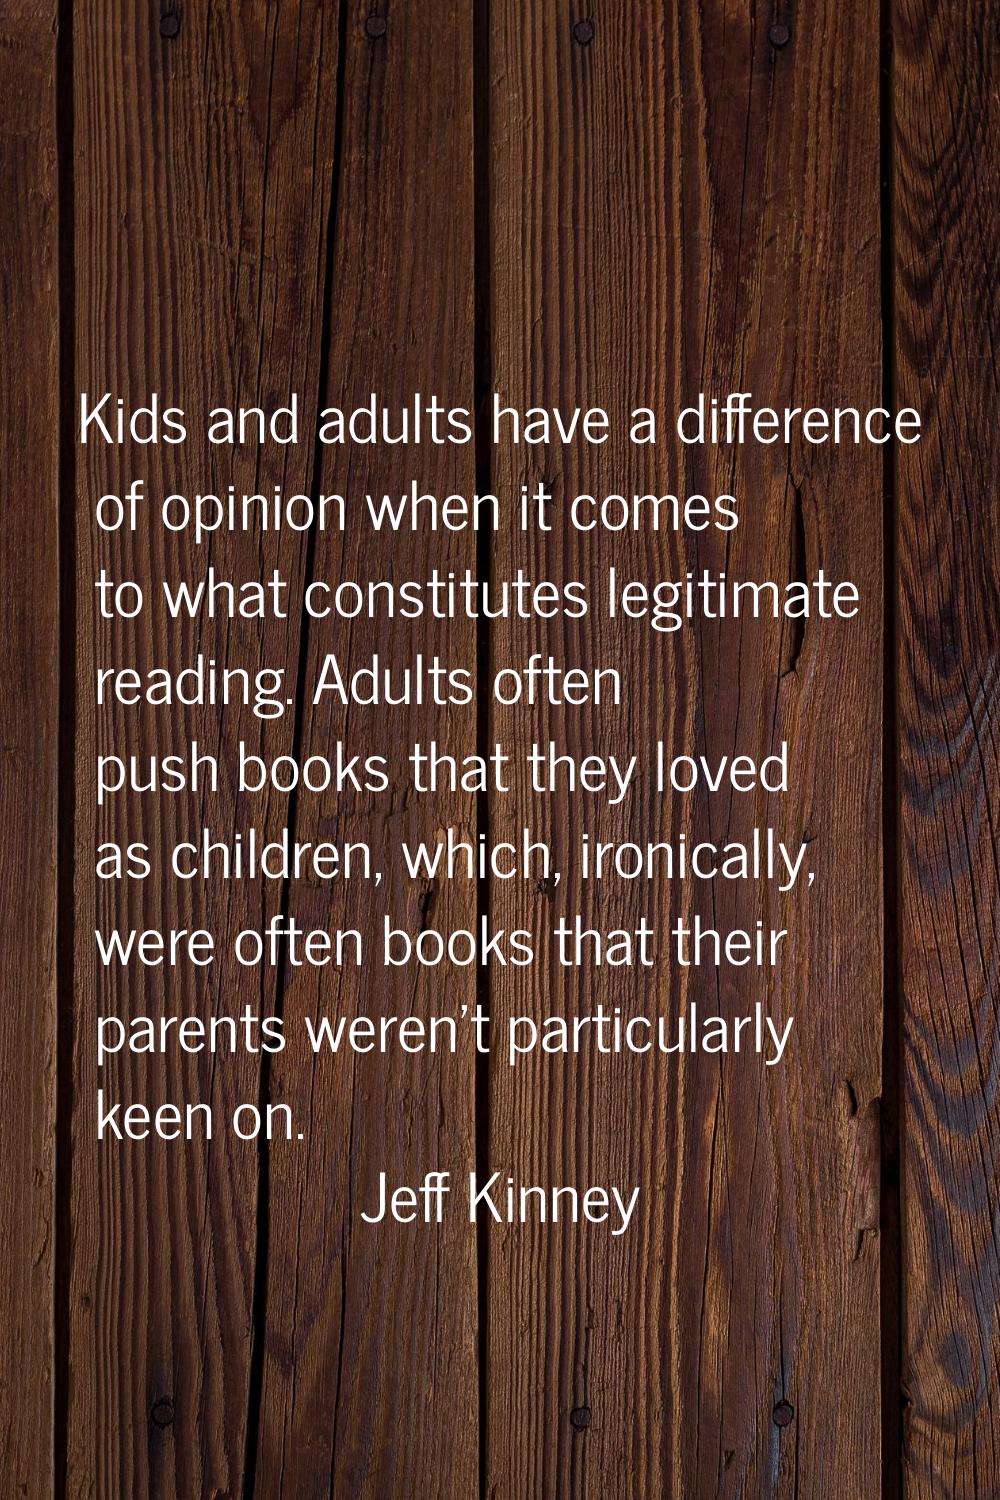 Kids and adults have a difference of opinion when it comes to what constitutes legitimate reading. 